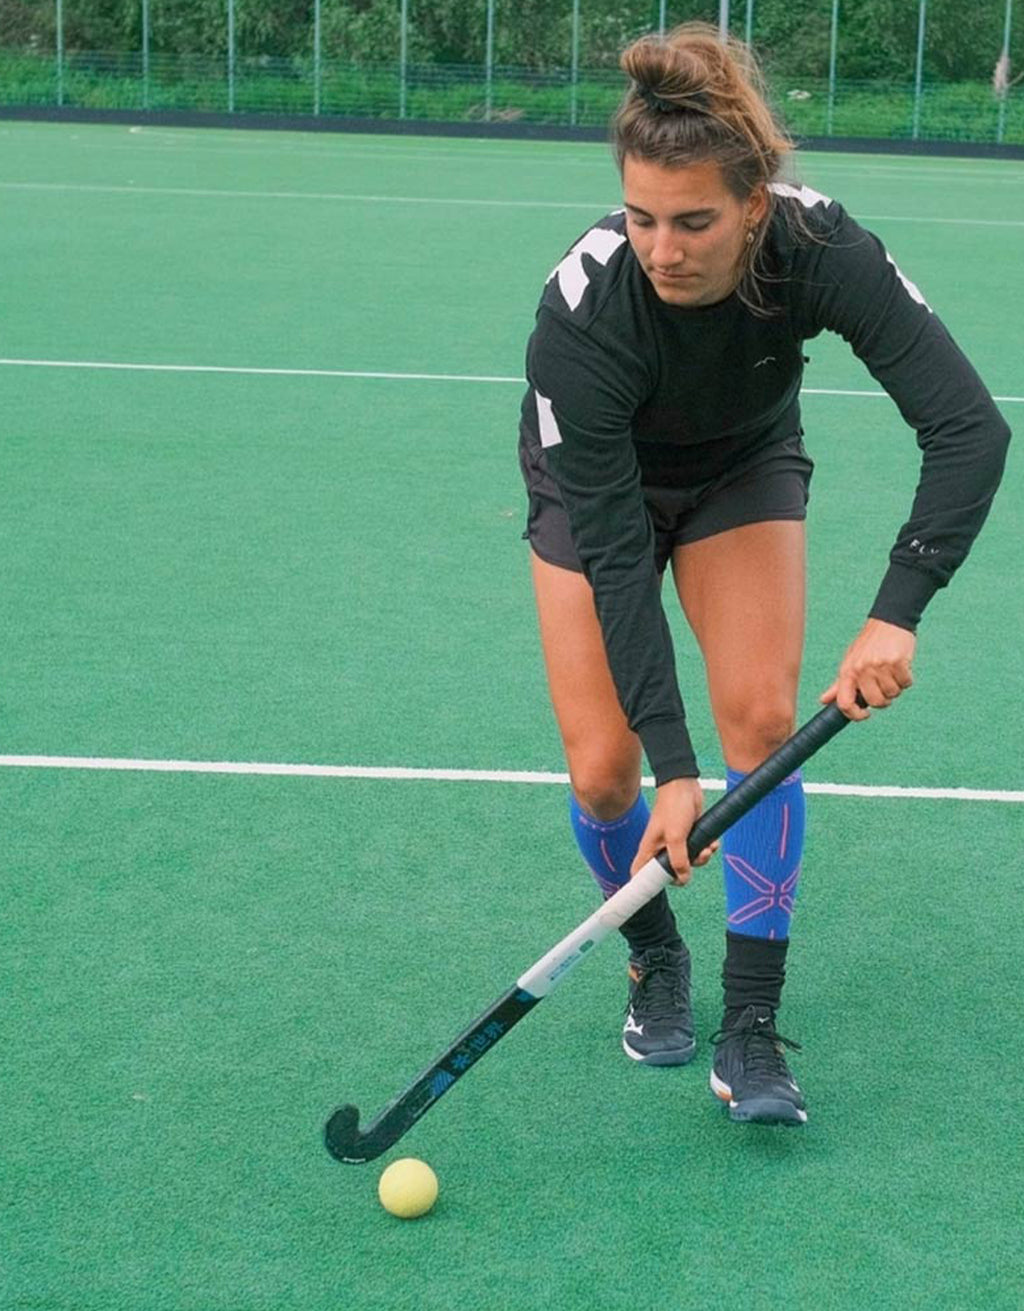 Frédérique Matla is playing field hockey and is wearing blue high socks. 